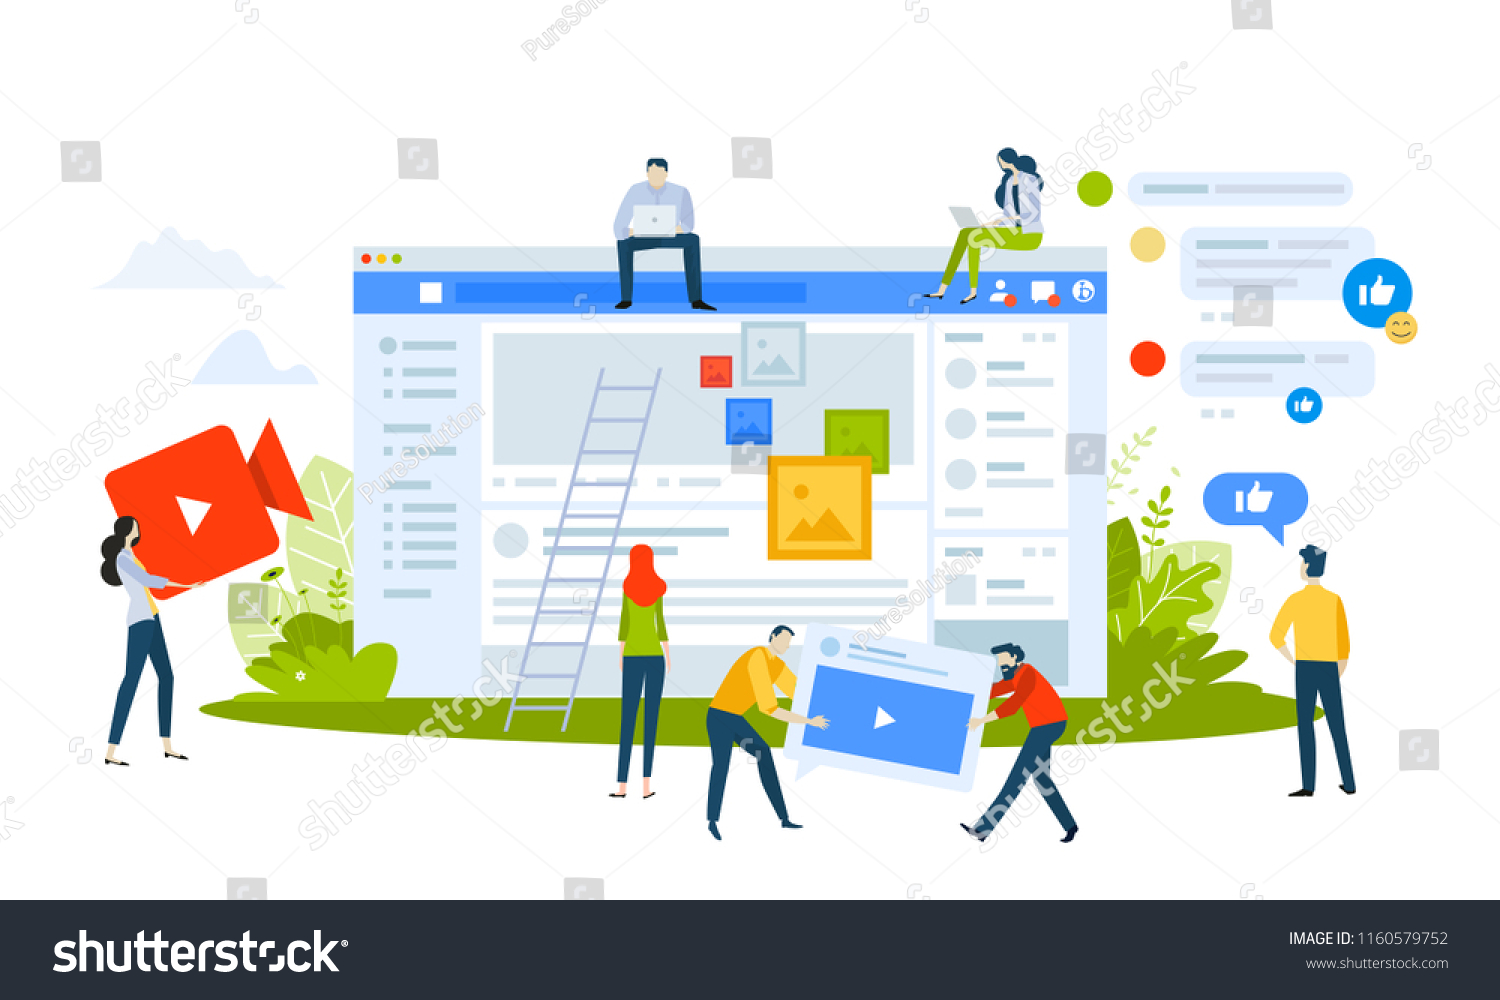 Vector illustration concept of social media apps and services. Creative flat design for web banner, marketing material, business presentation, online advertising. #1160579752